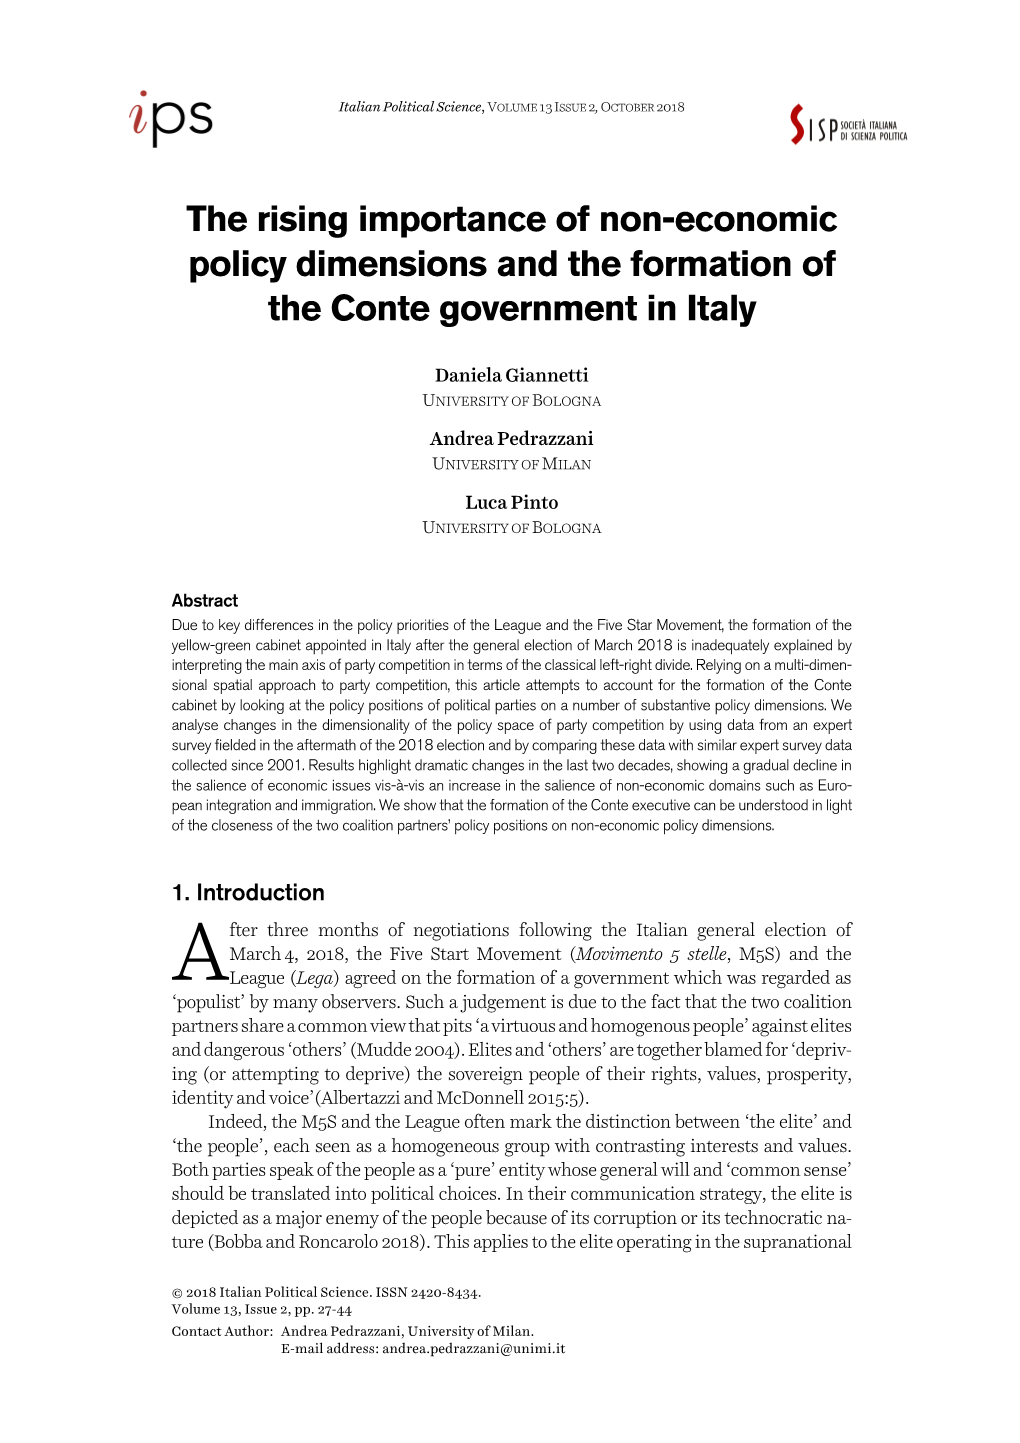 The Rising Importance of Non-Economic Policy Dimensions and the Formation of the Conte Government in Italy